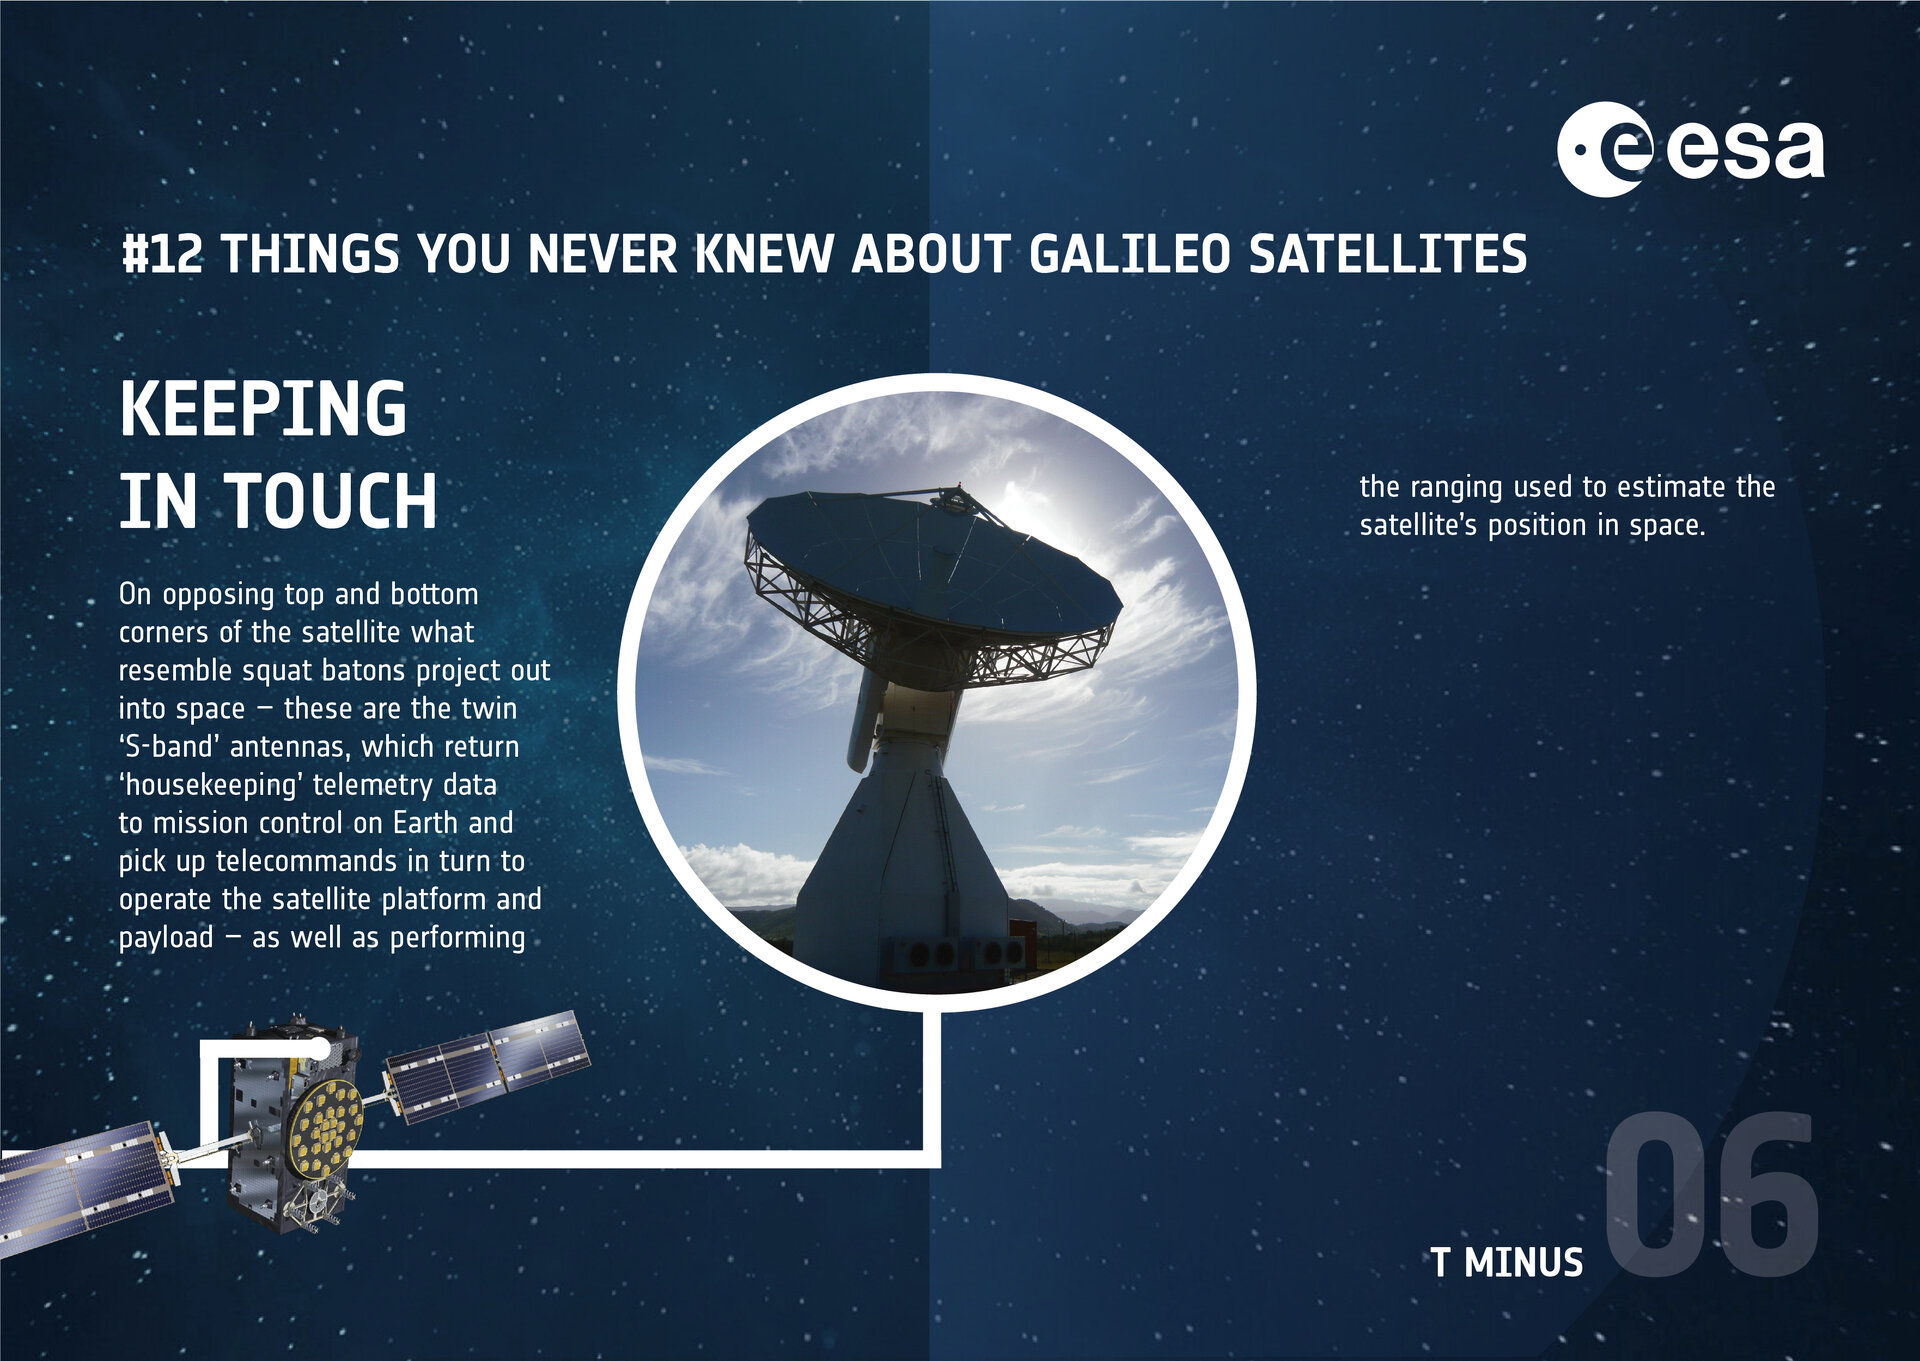 Galileo infographic: 'Keeping in touch'